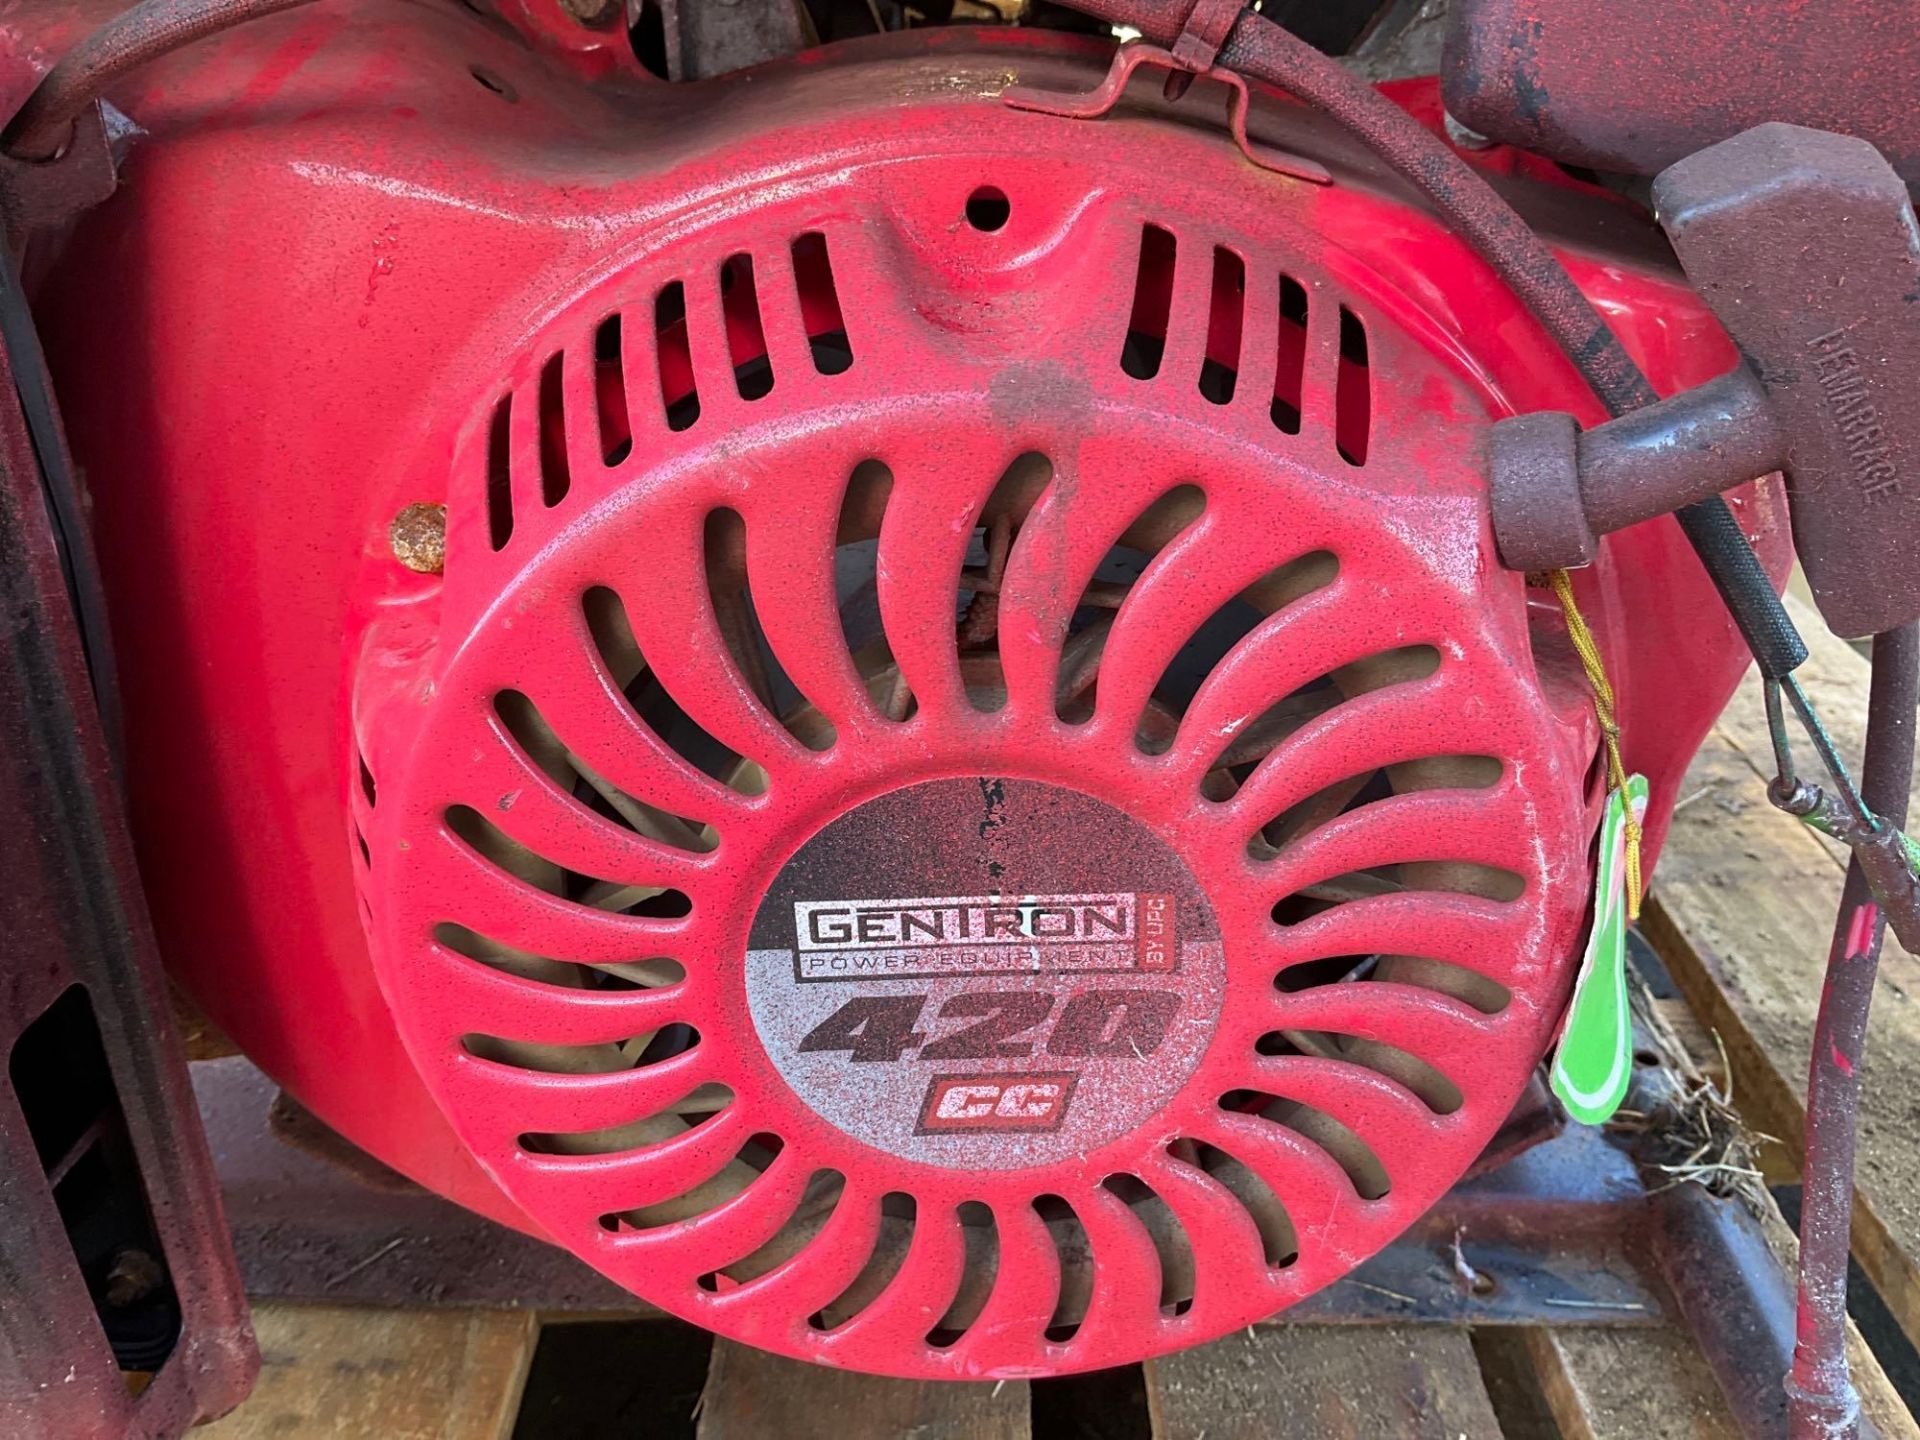 GENTRON PRO2 7500W GENERATOR MIDEL GG7500, GAS POWERED, APPROX 120/240 RATED VOLTS, SINGLE PHASE, - Image 18 of 21